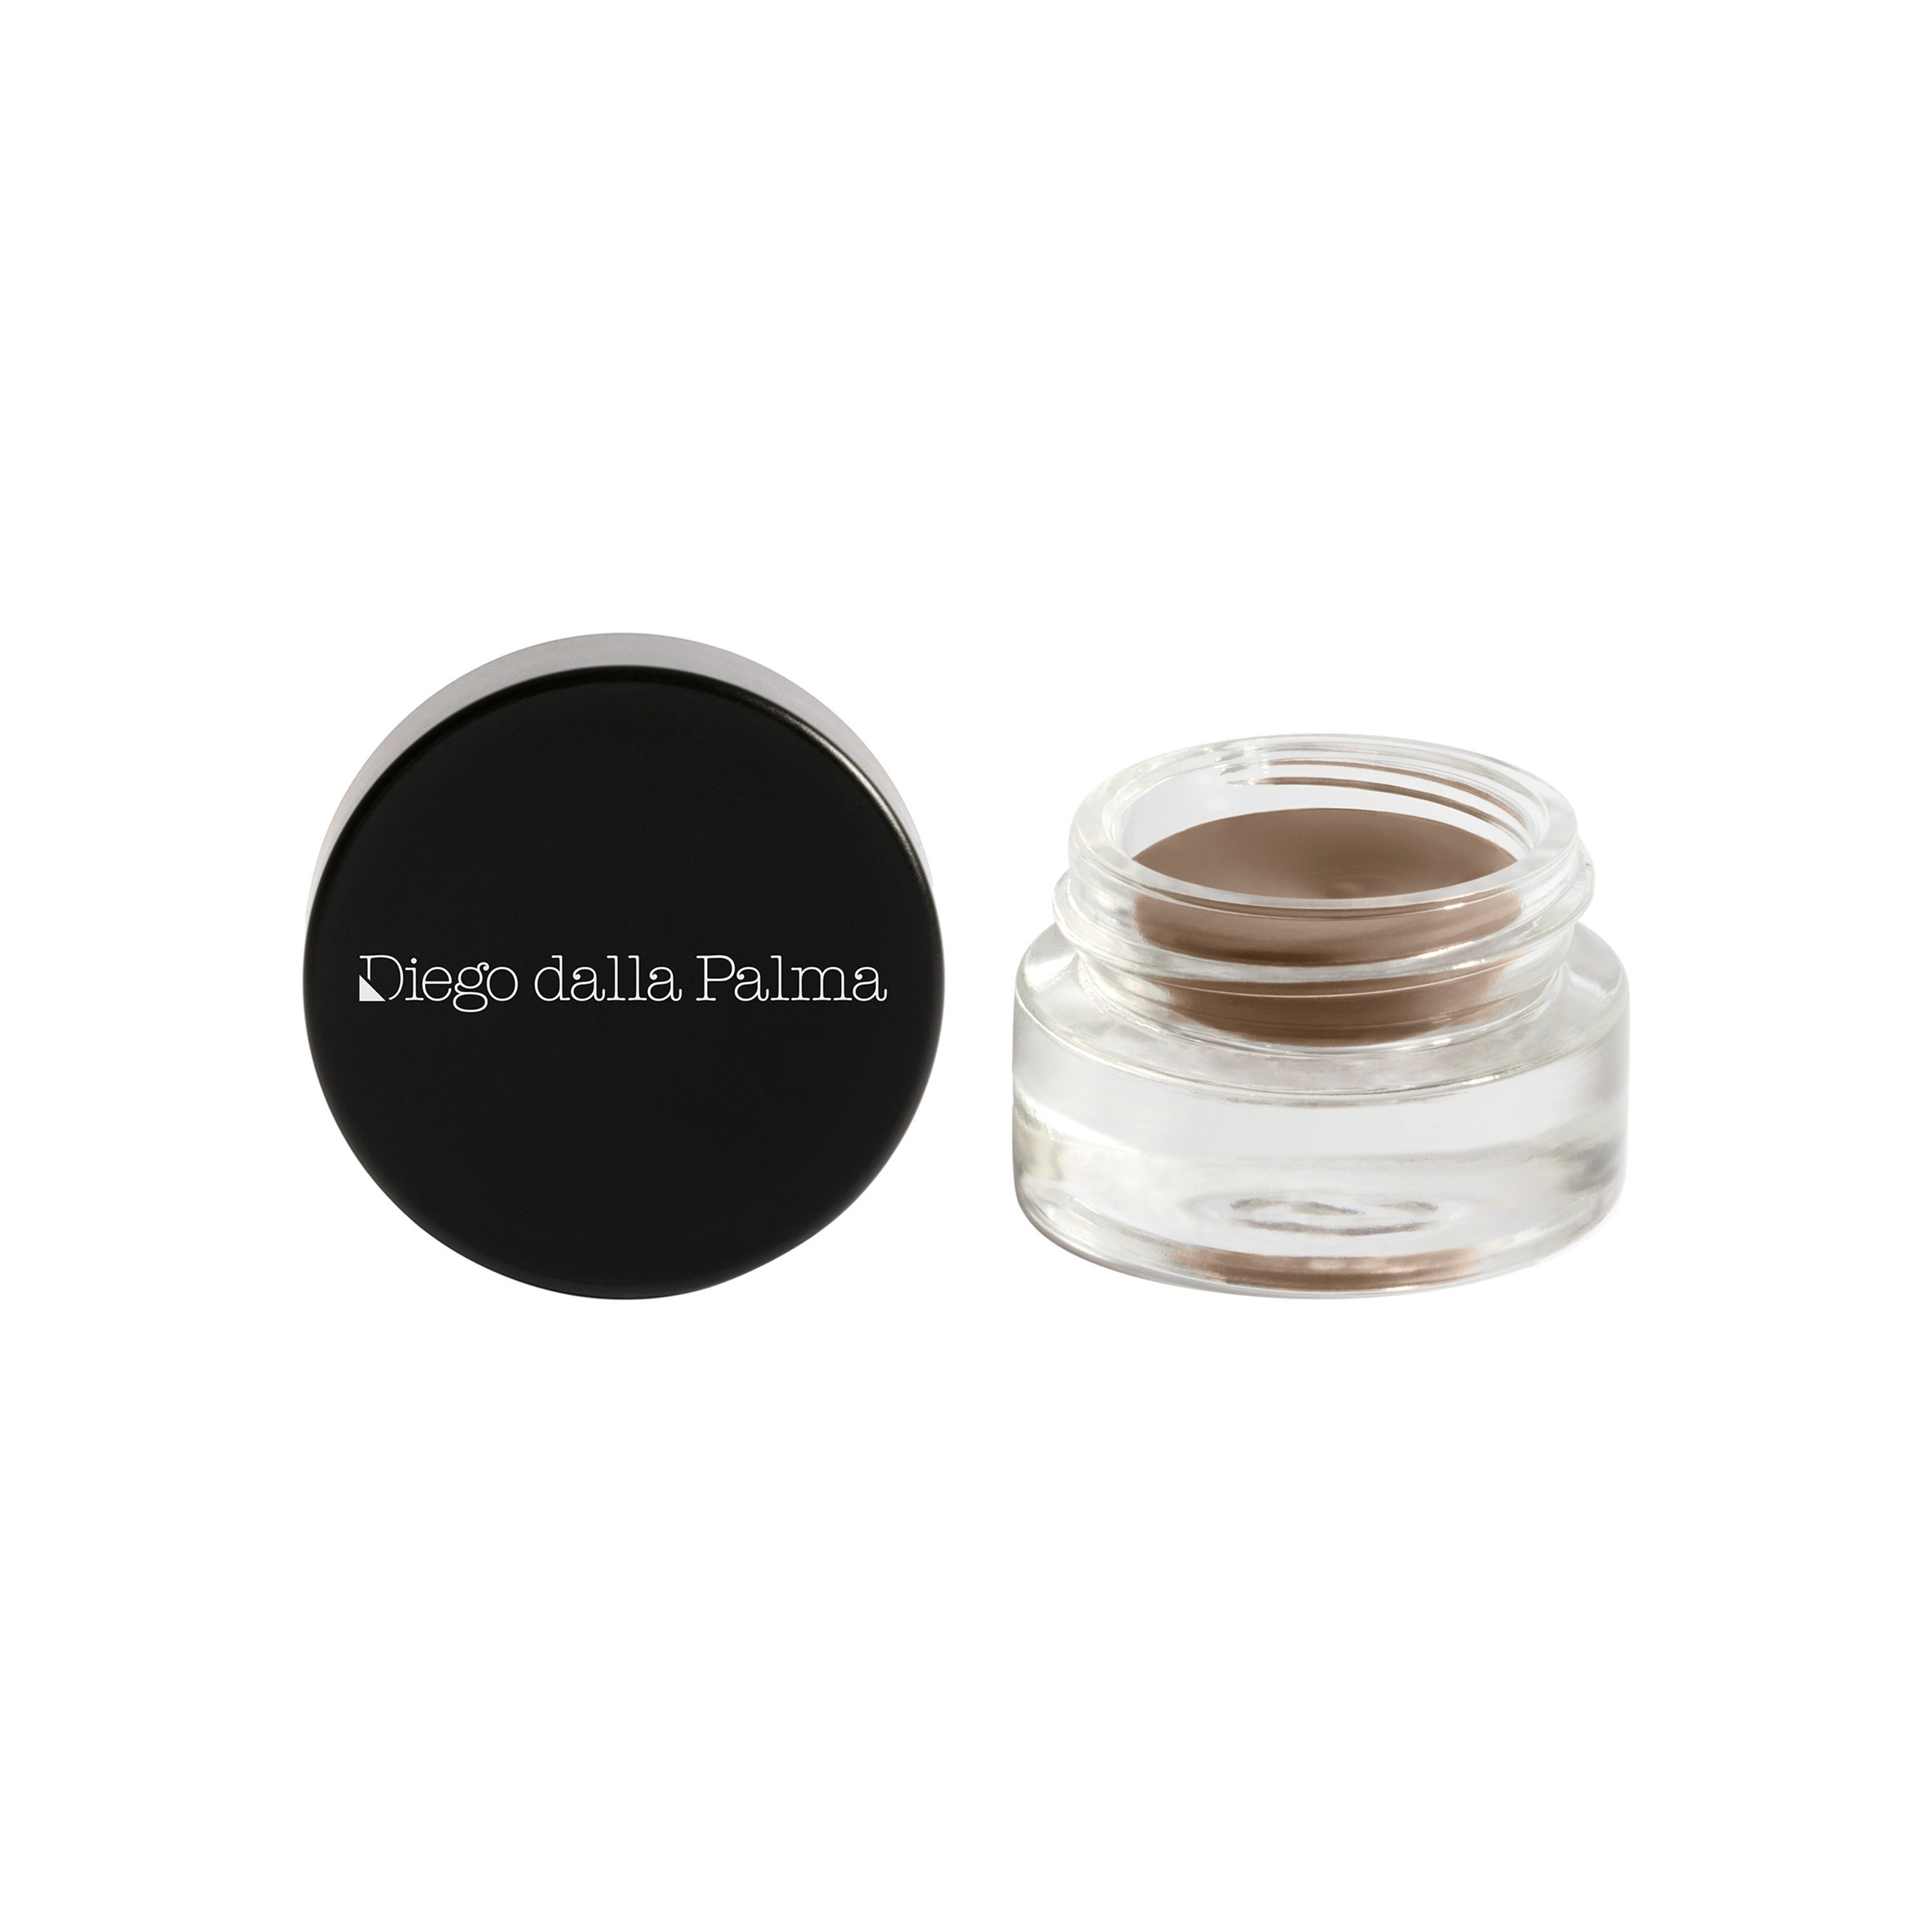 Waterproof Eyebrow Liner Cream - 02 warm taupe, Taupe Grey, large image number 1